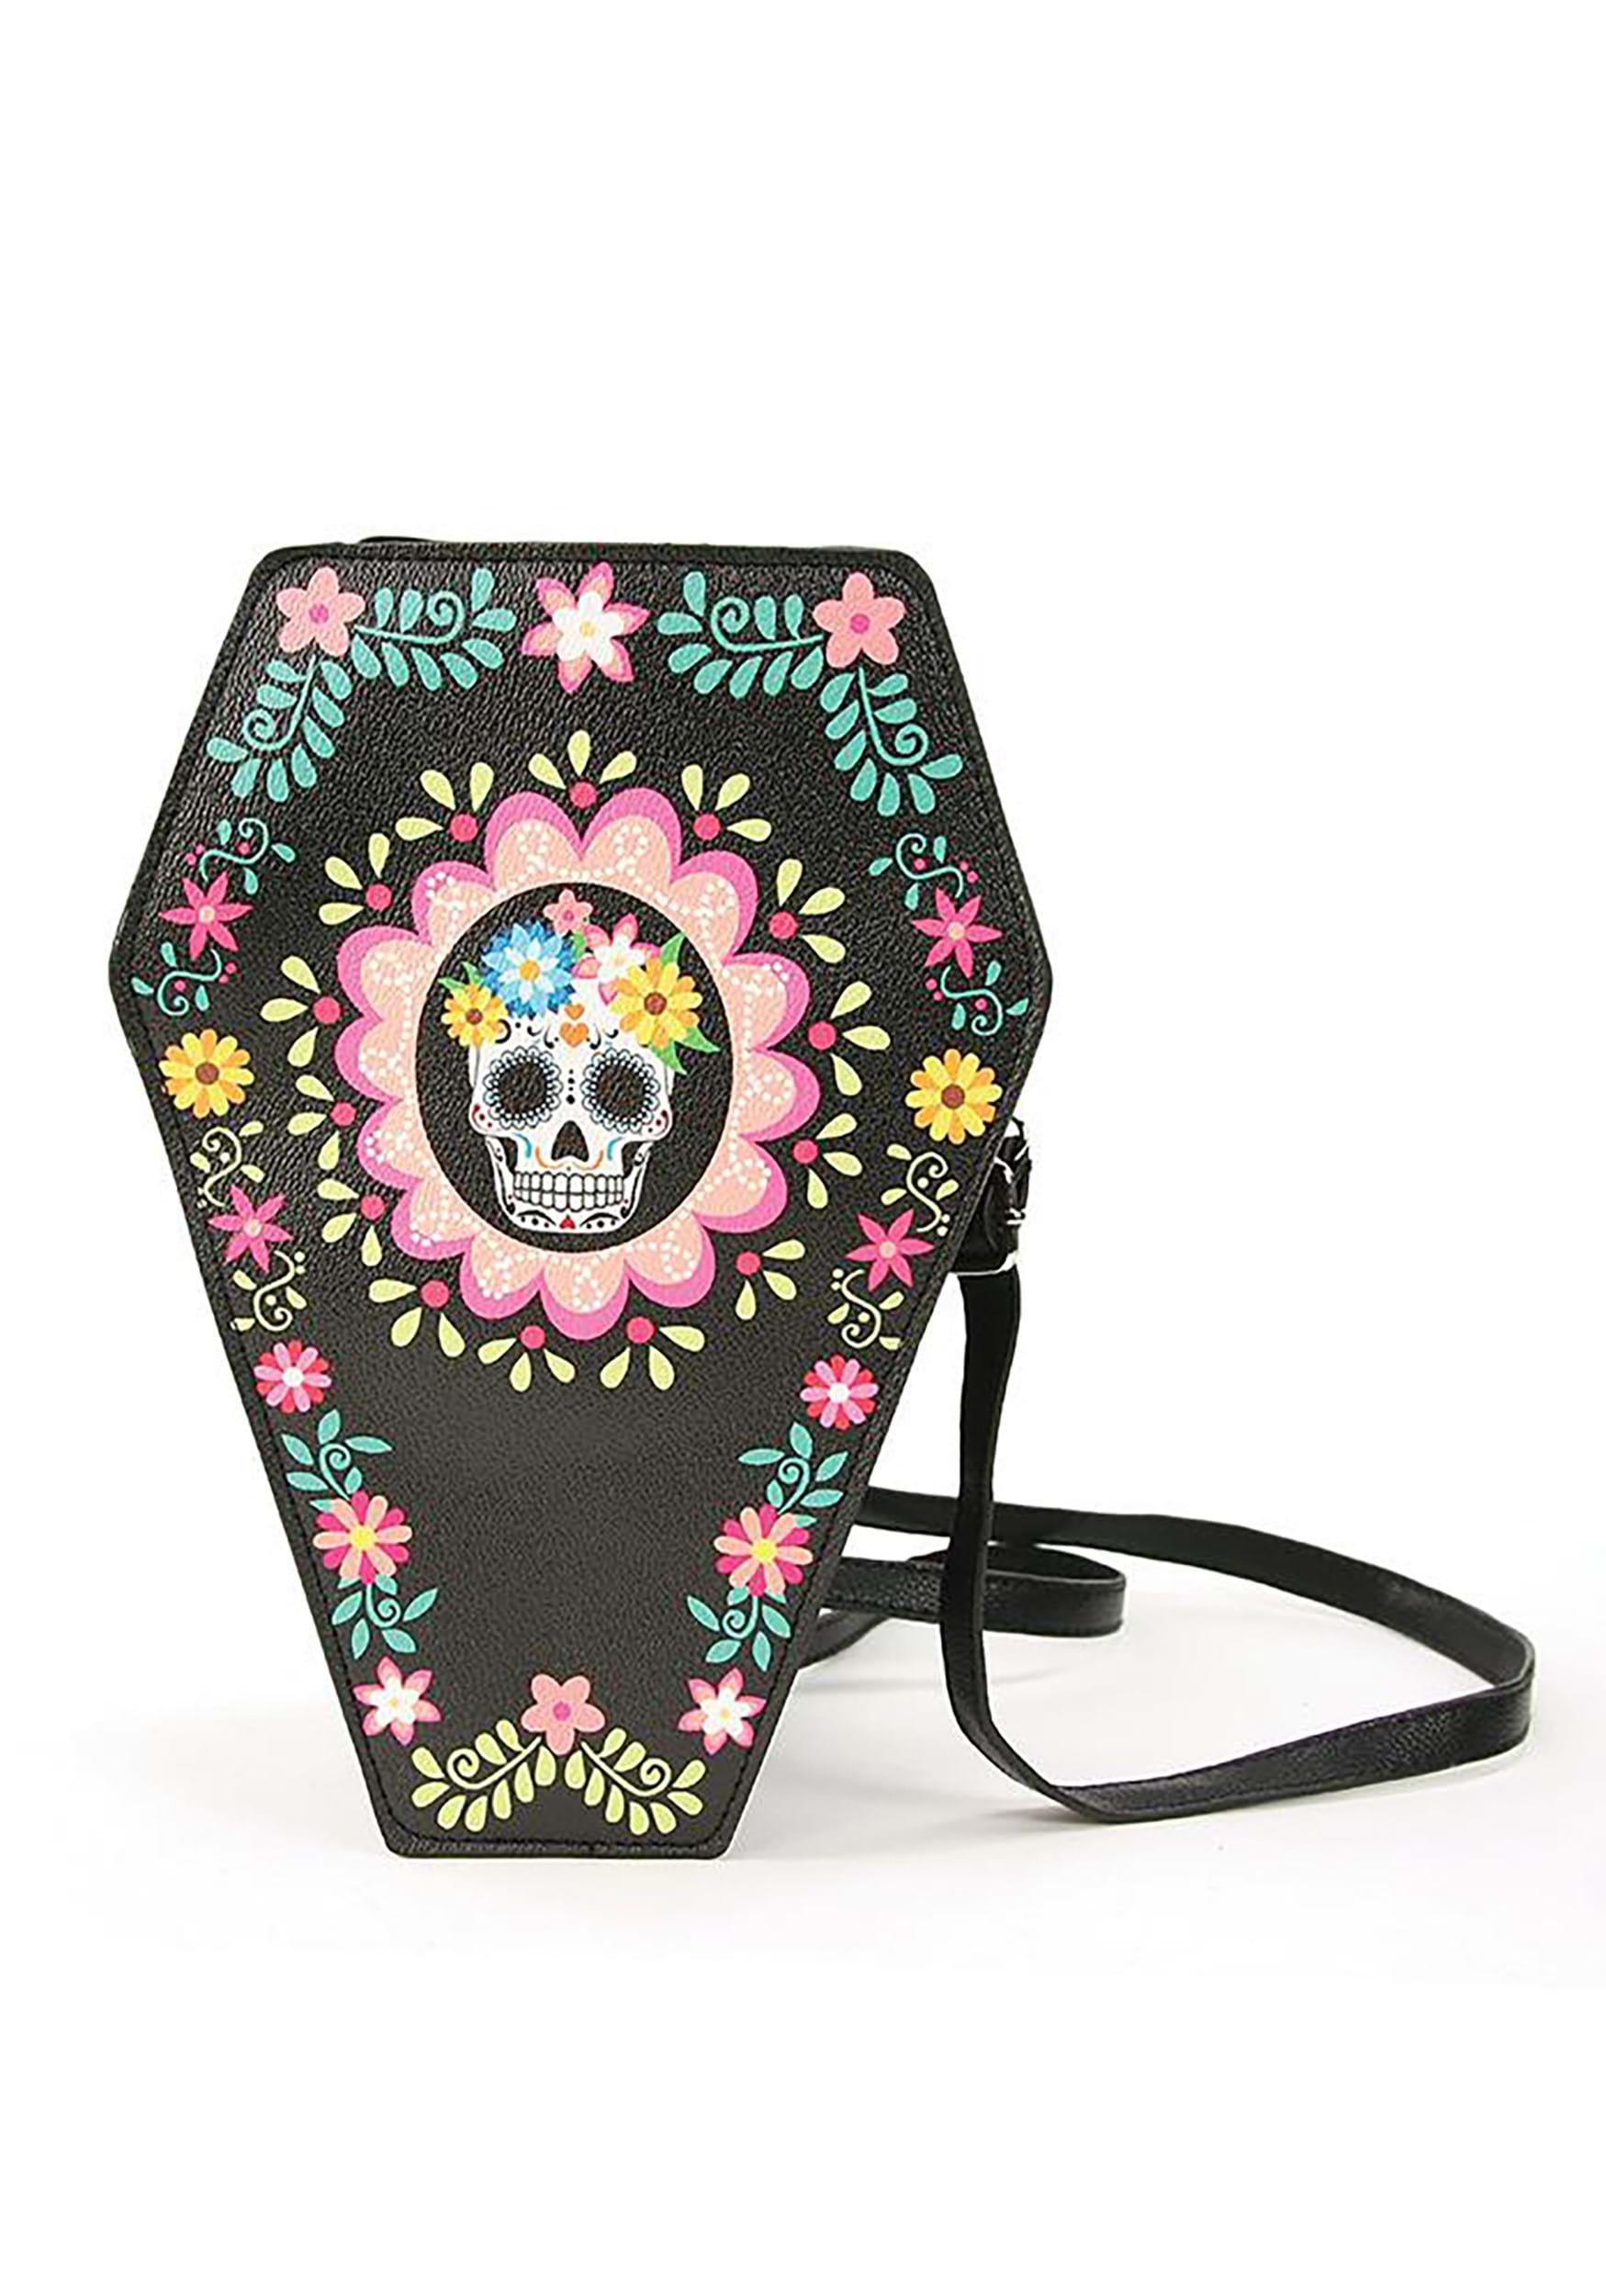 Women’s Day of the Dead Coffin Purse